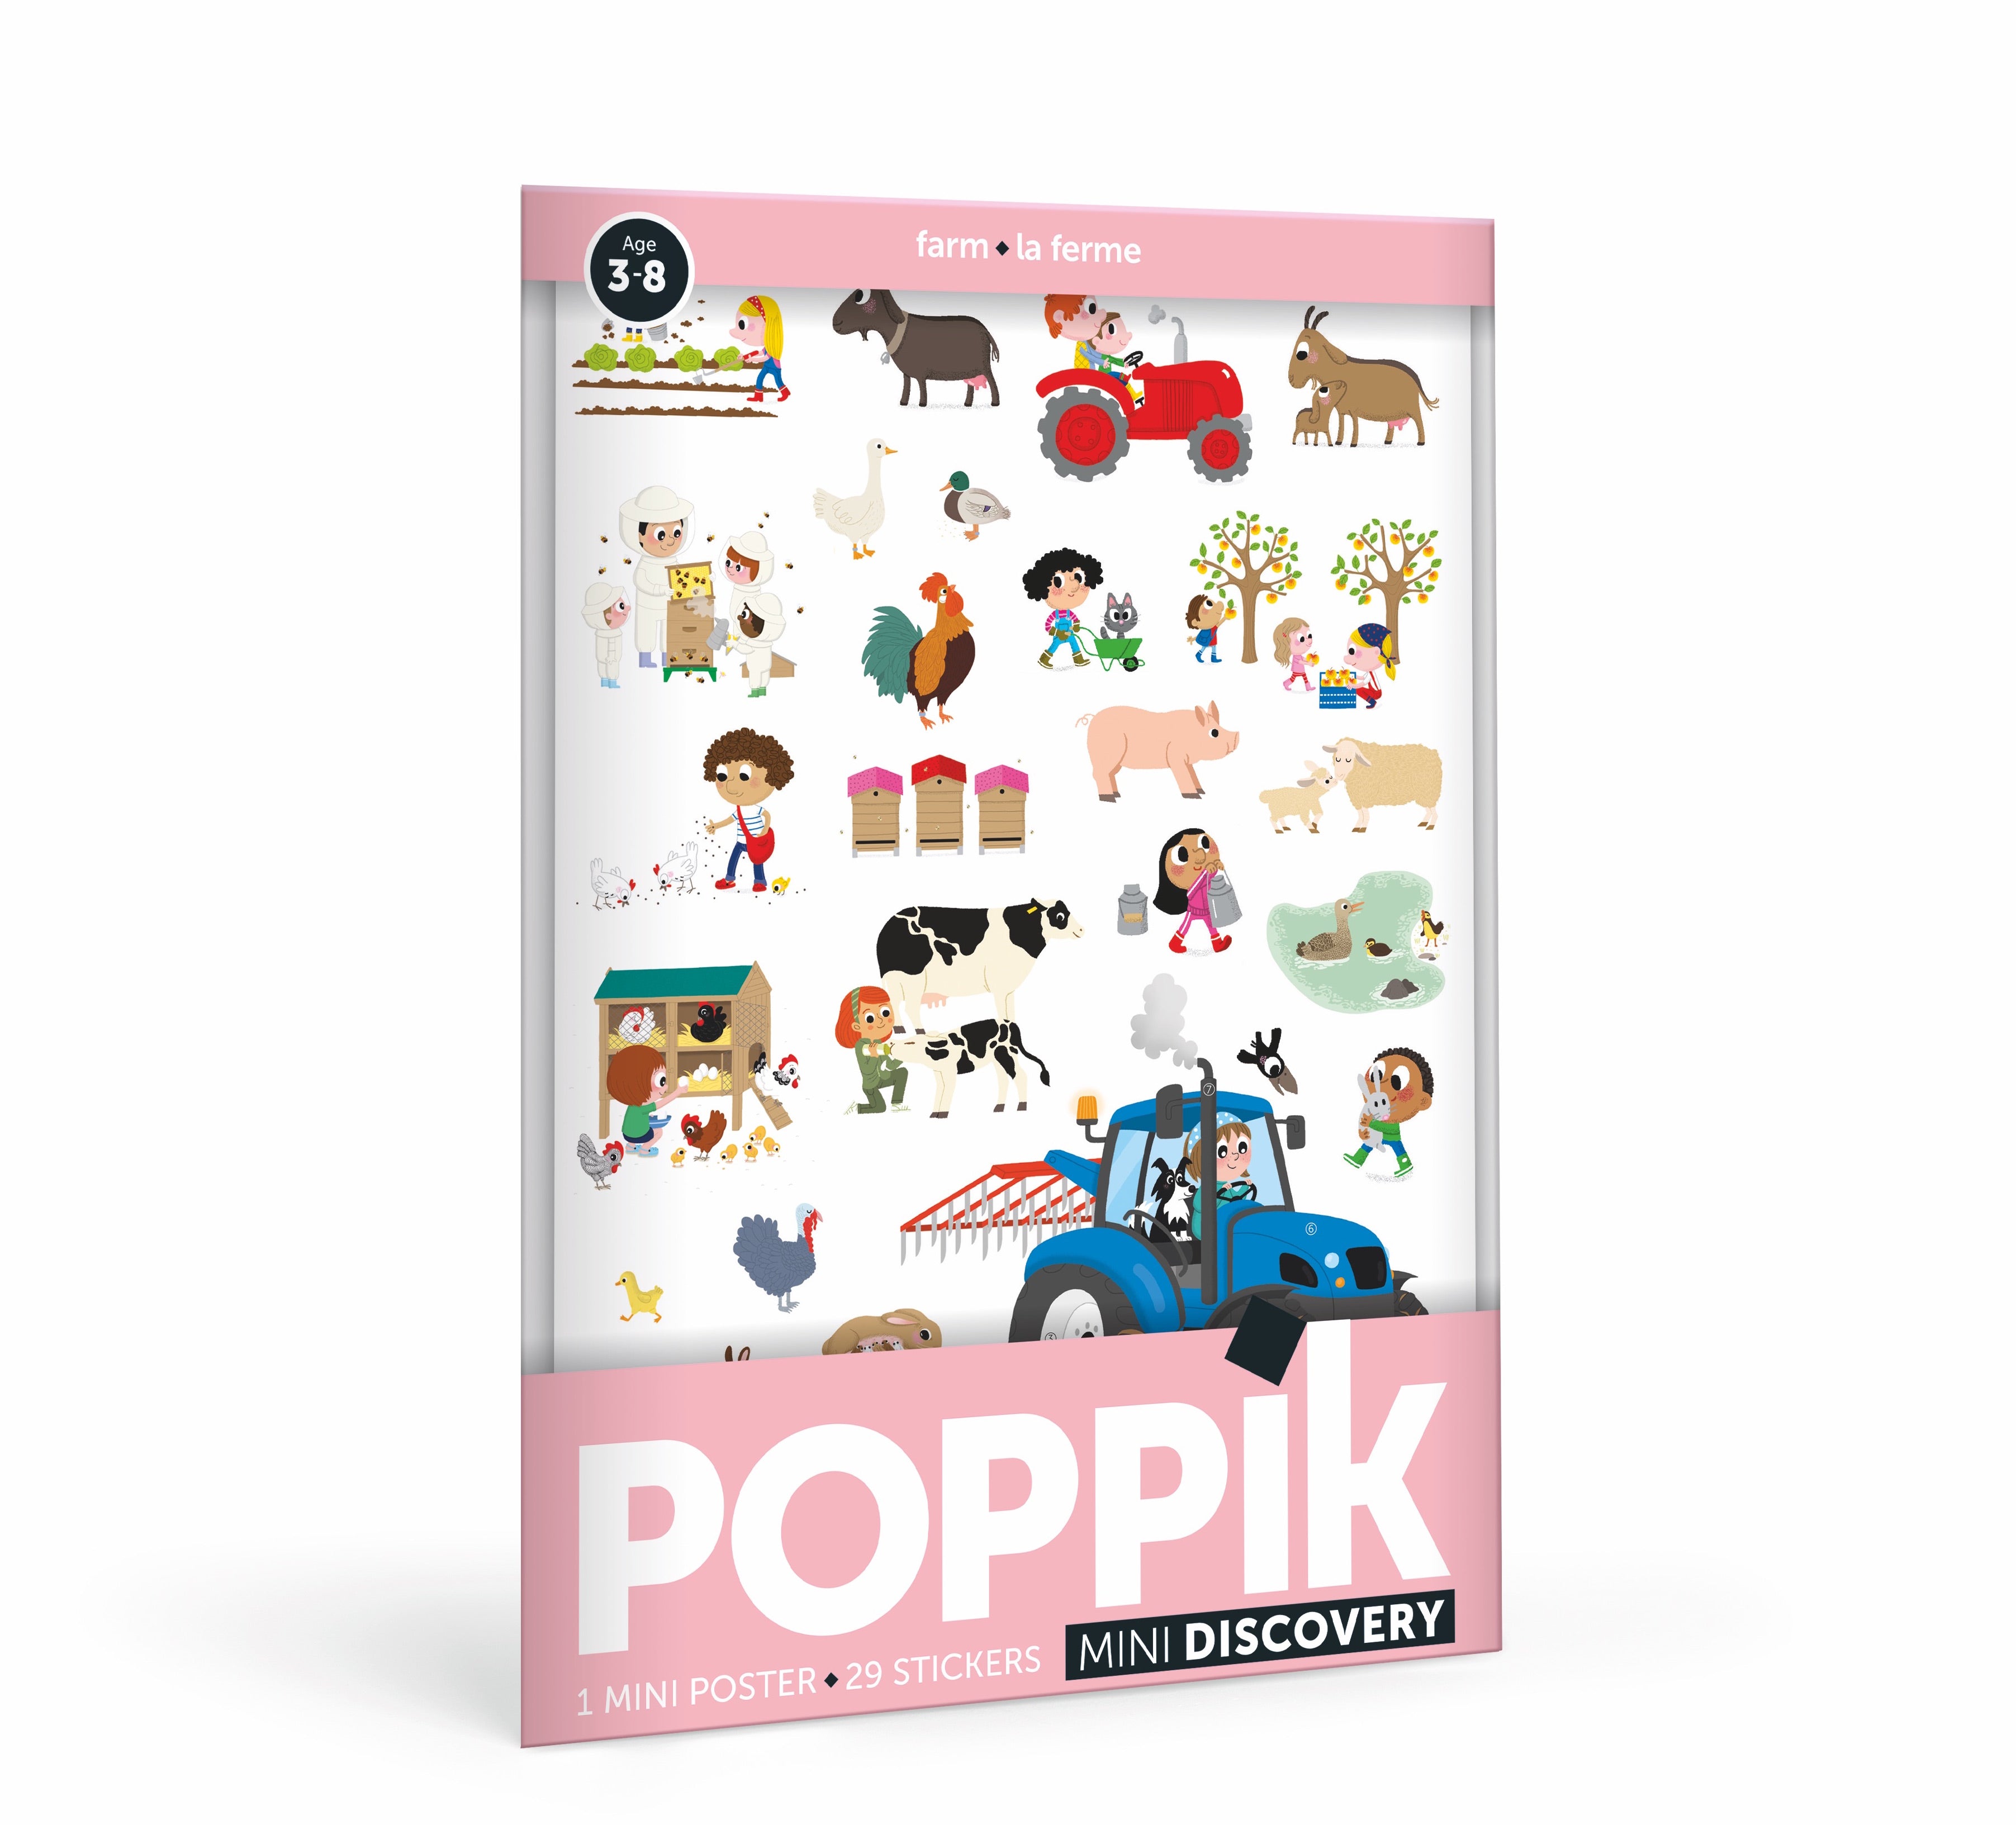 Mini Poster with 29 stickers – Farm